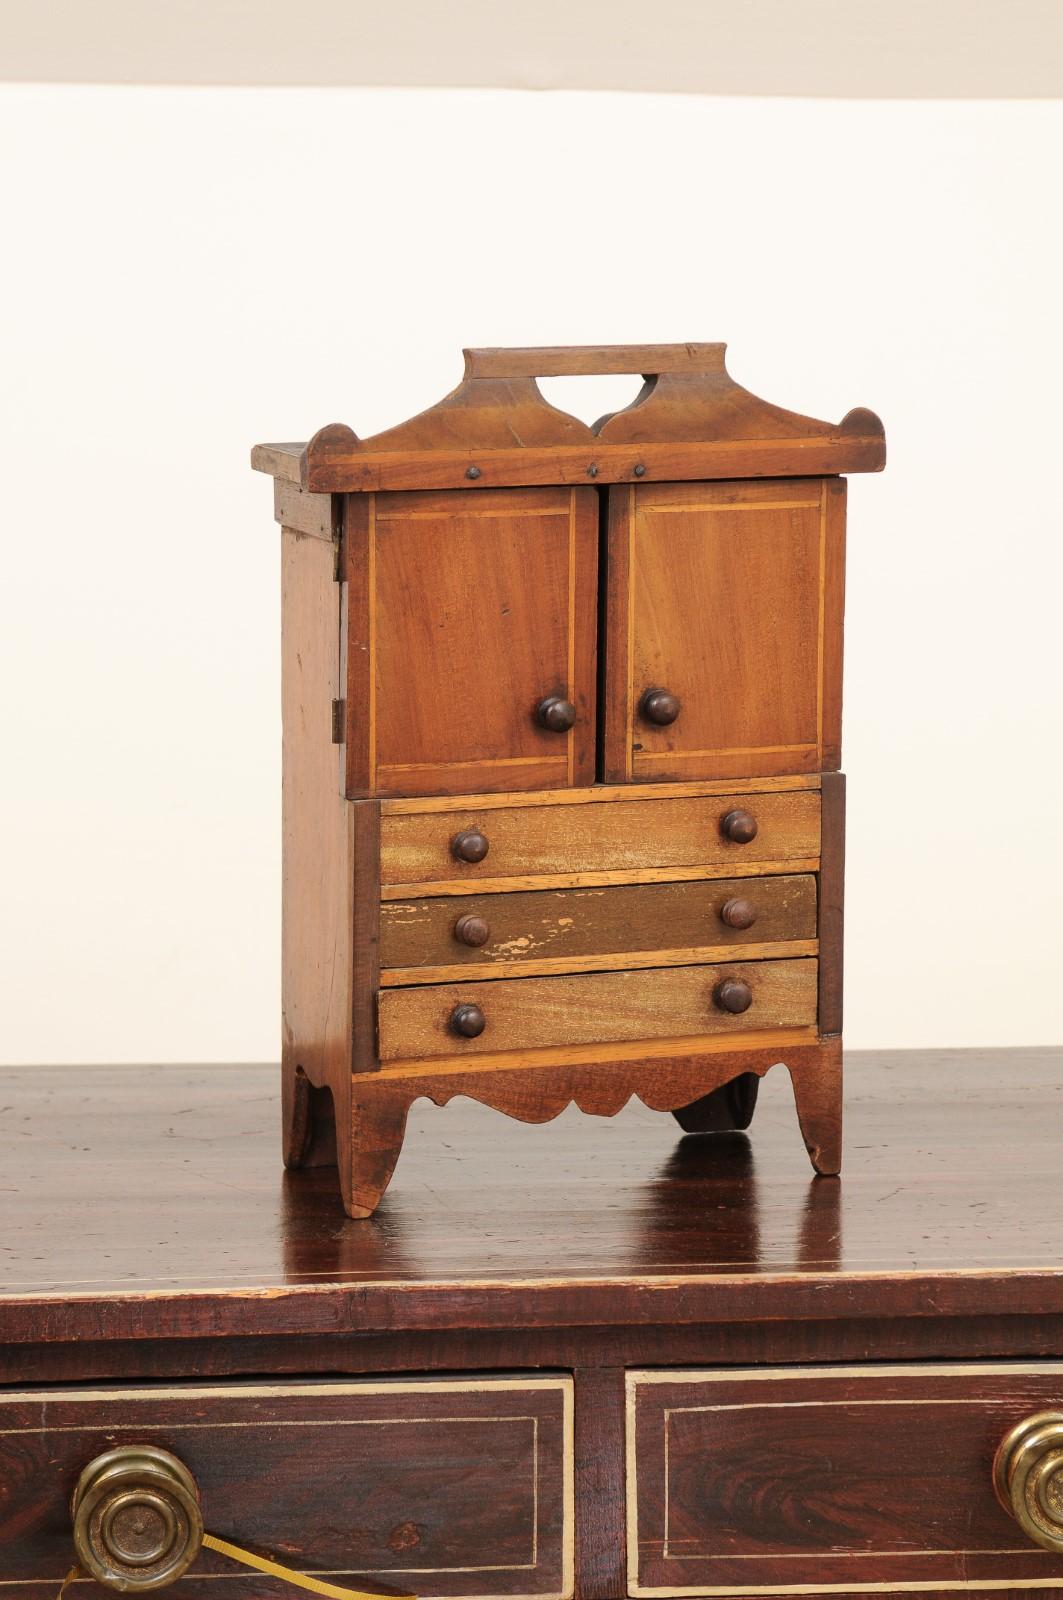 An English fruitwood miniature cabinet from the late 19th century, with two petite doors and three drawers. Created in England during the last quarter of the 19th century, this fruitwood cabinet charms us with its very small proportions and rustic